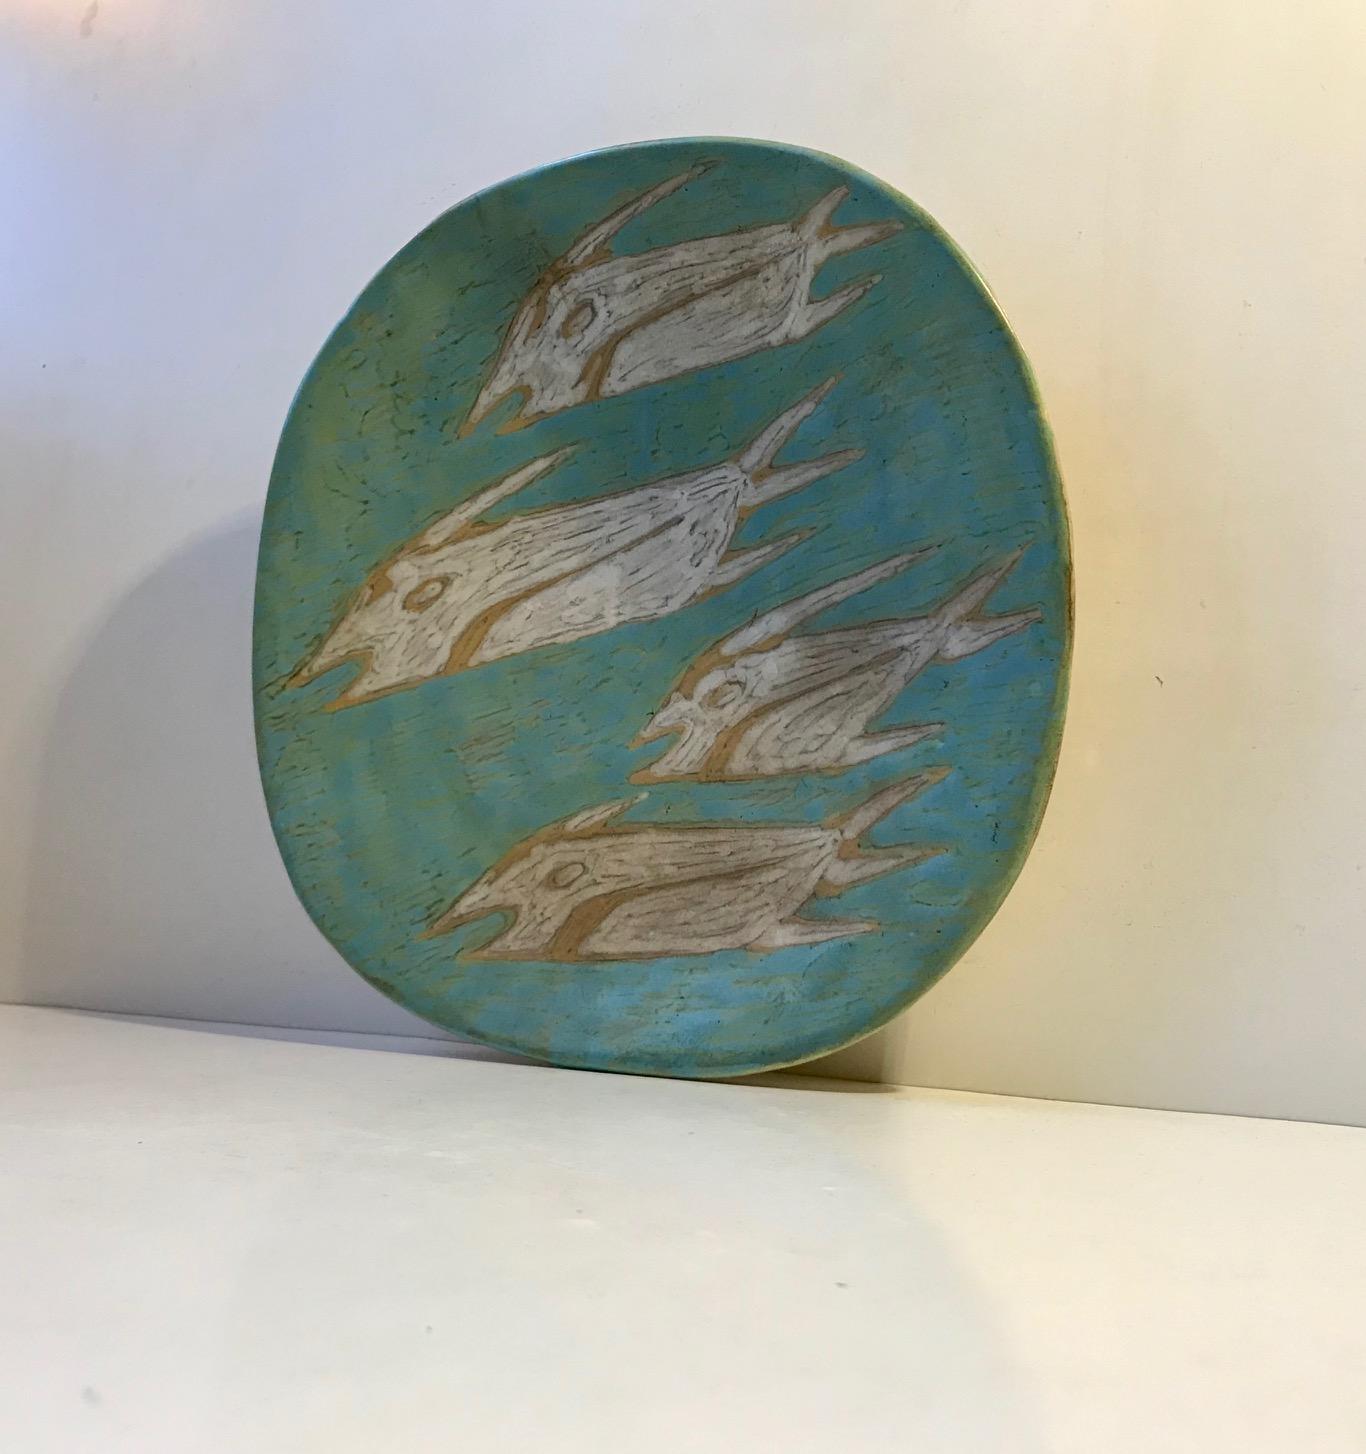 Unique art pottery dish or plaque executed by the Hungarian ceramist Gorka Livia during the 1950s. It has a deliberately crooked - asymmetrical form and has a difficult to desire main-glaze: mint, turquoise, green, blueish. Its motif depicts 4